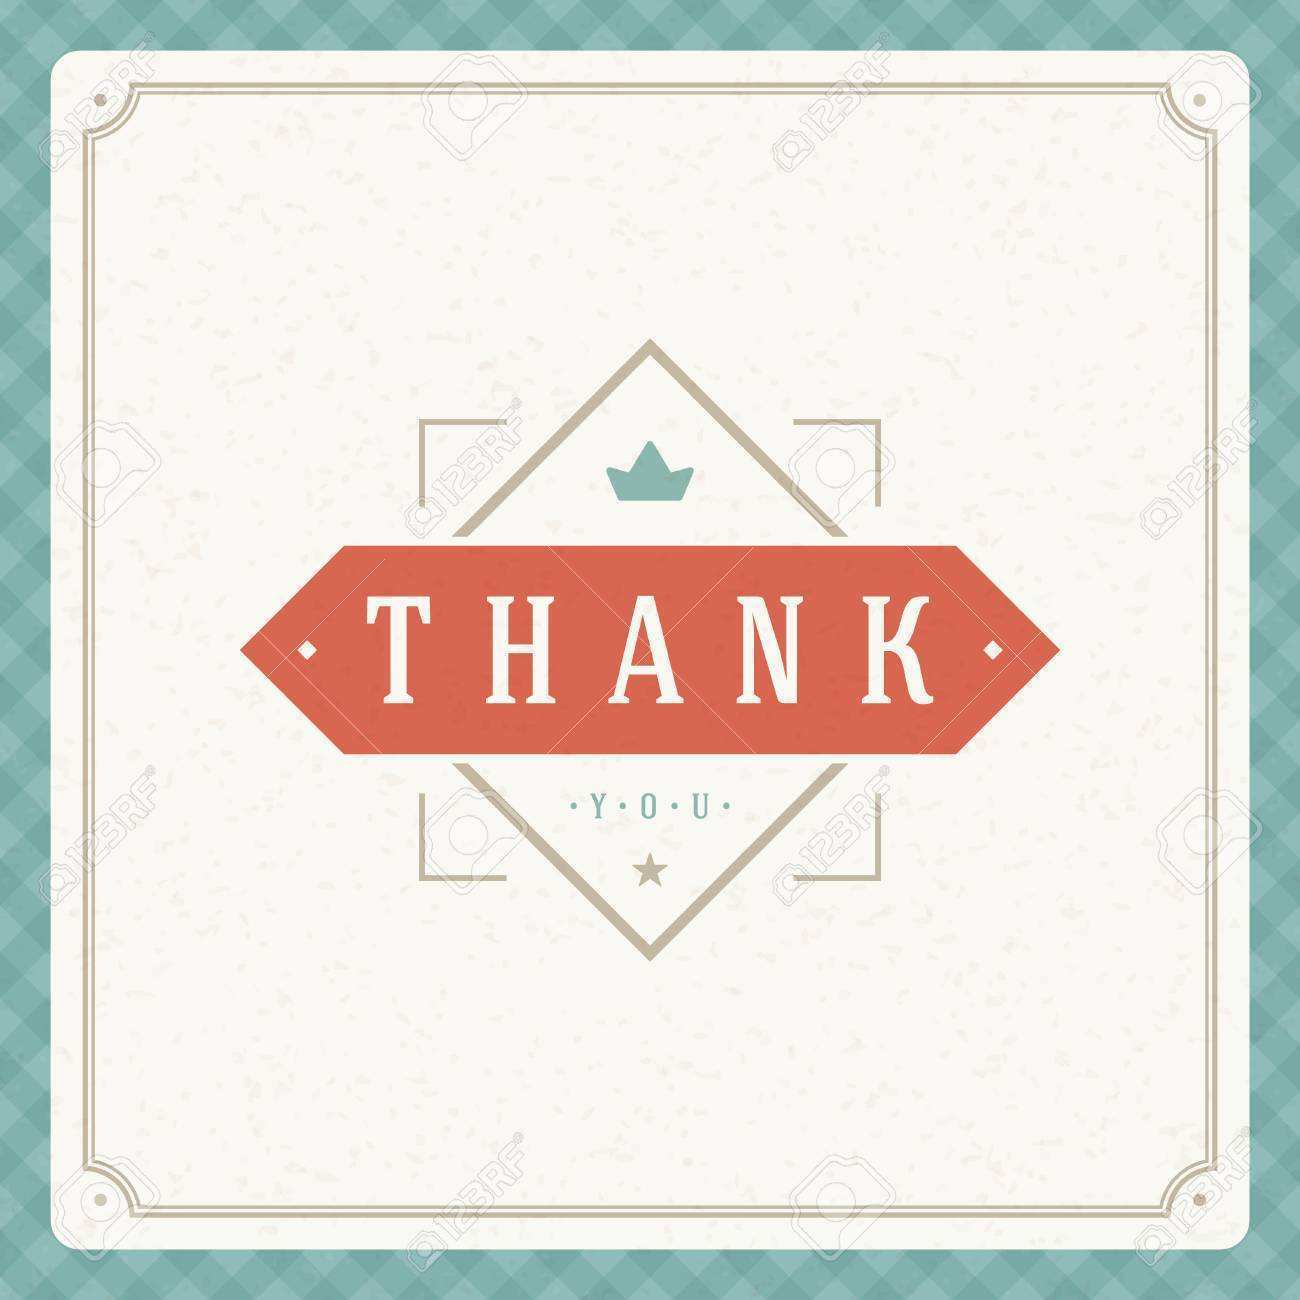 22 Customize Thank You Card Background Template With Stunning Design with Thank You Card Background Template